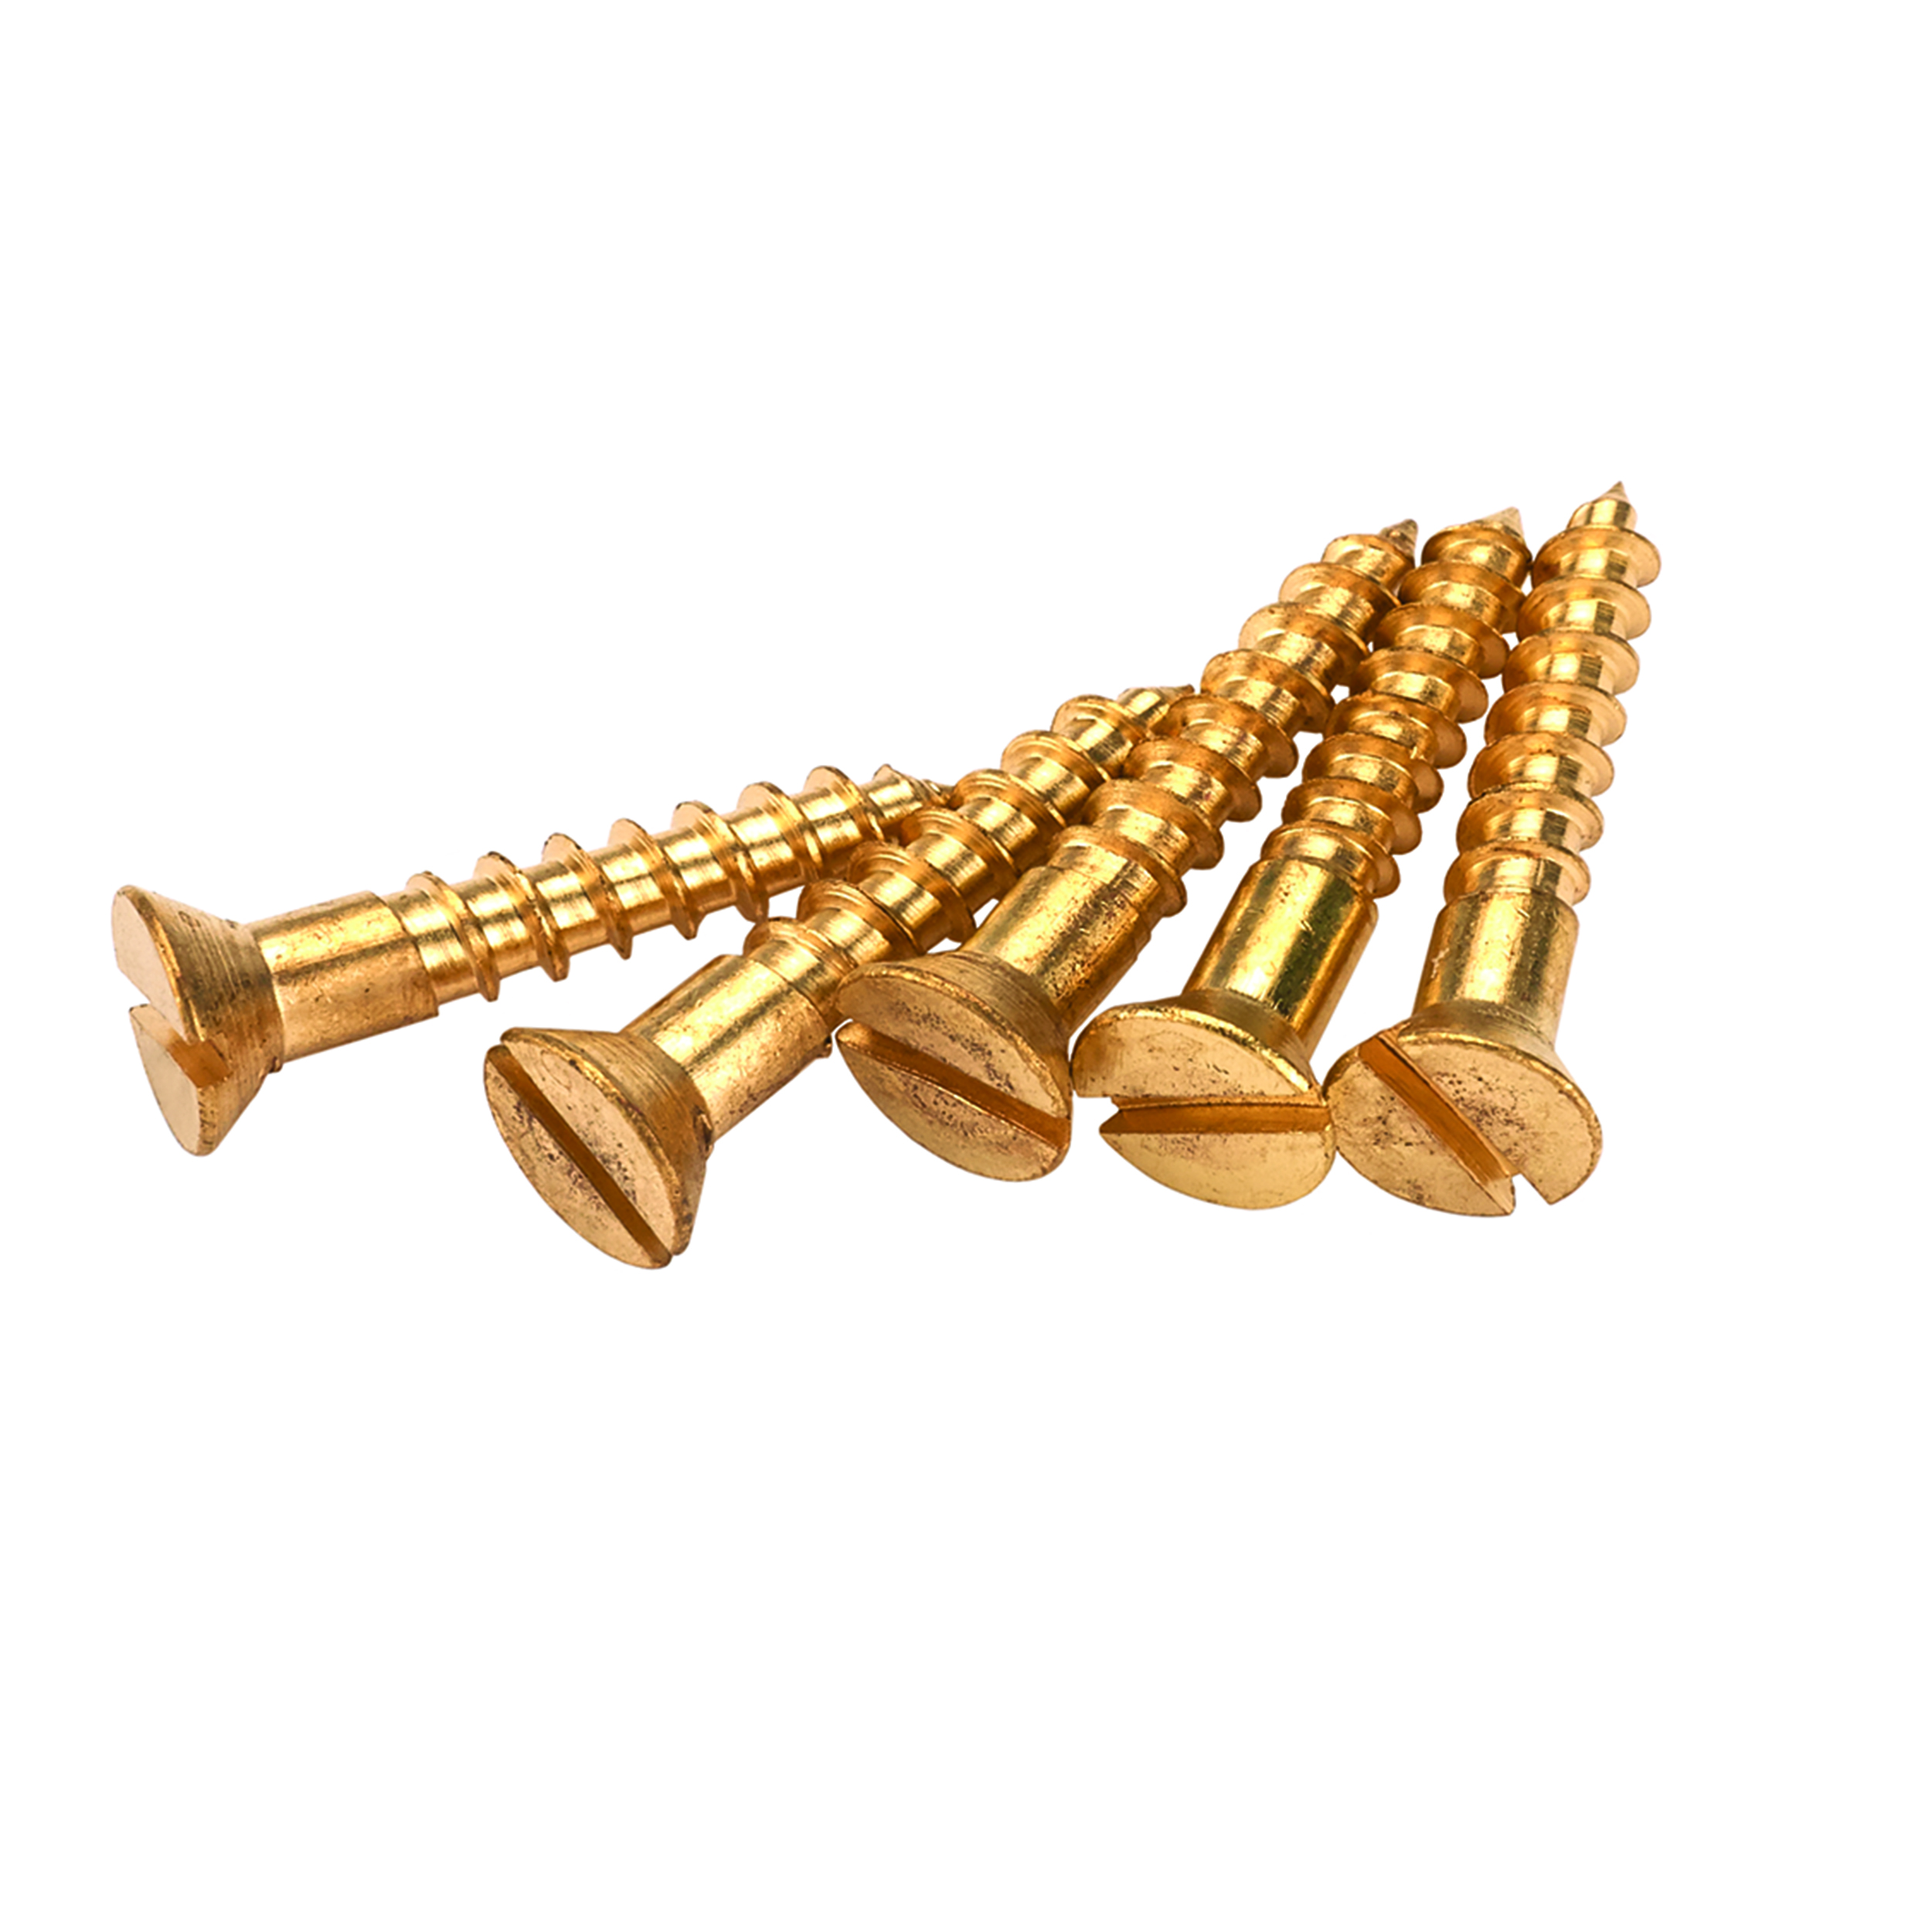 Solid Brass Screws #2 X 1/2" Slotted 25-piece